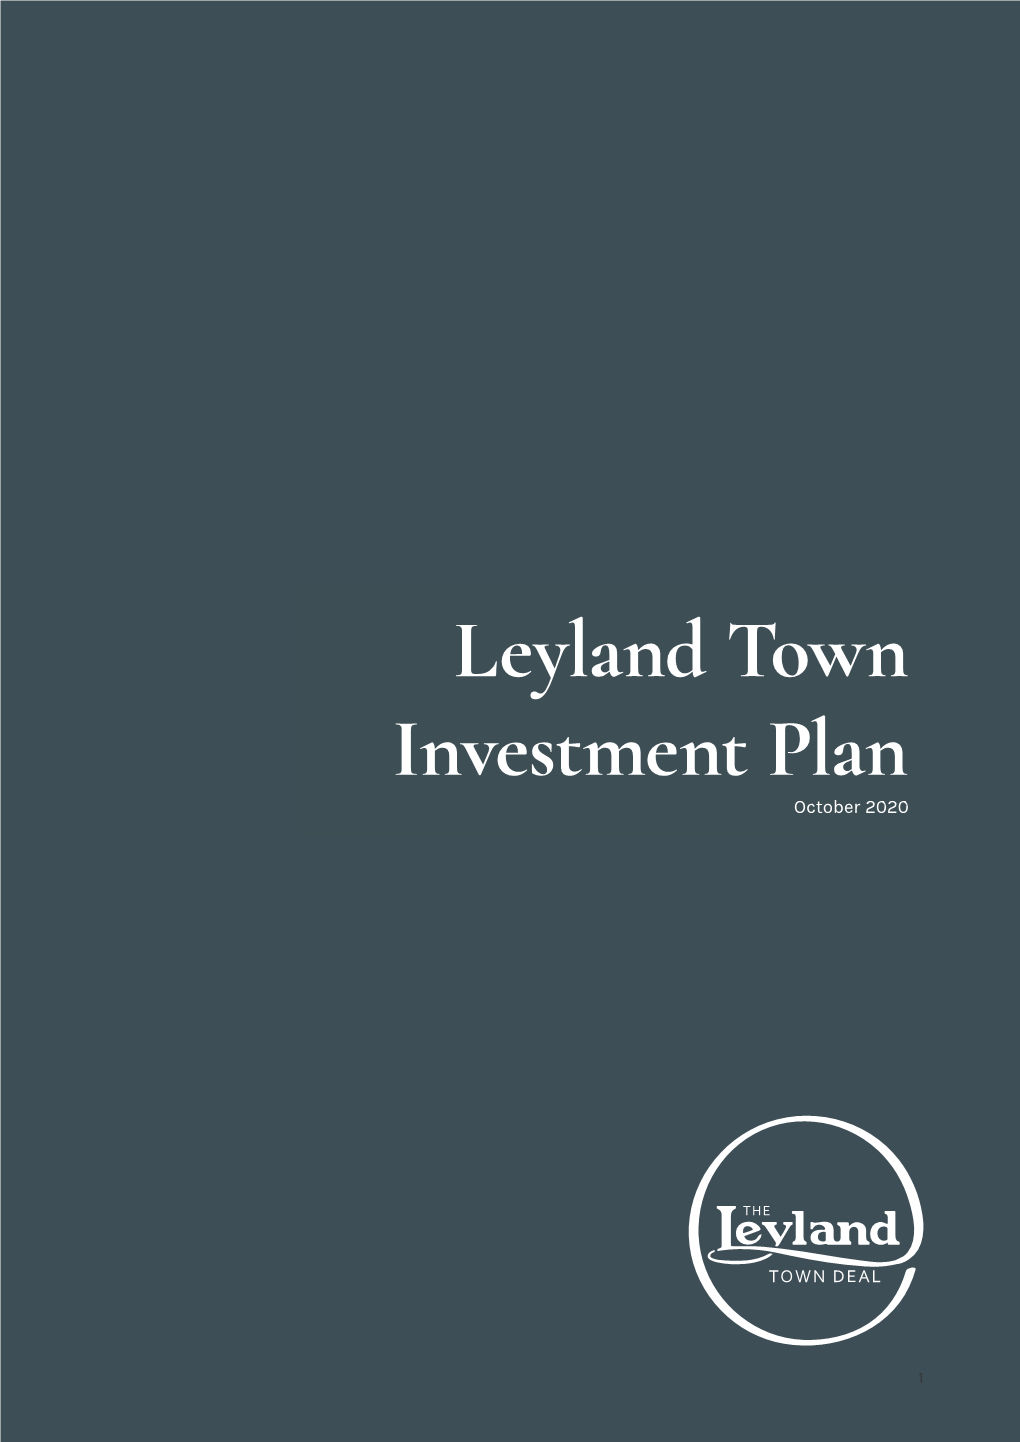 Leyland Town Investment Plan October 2020